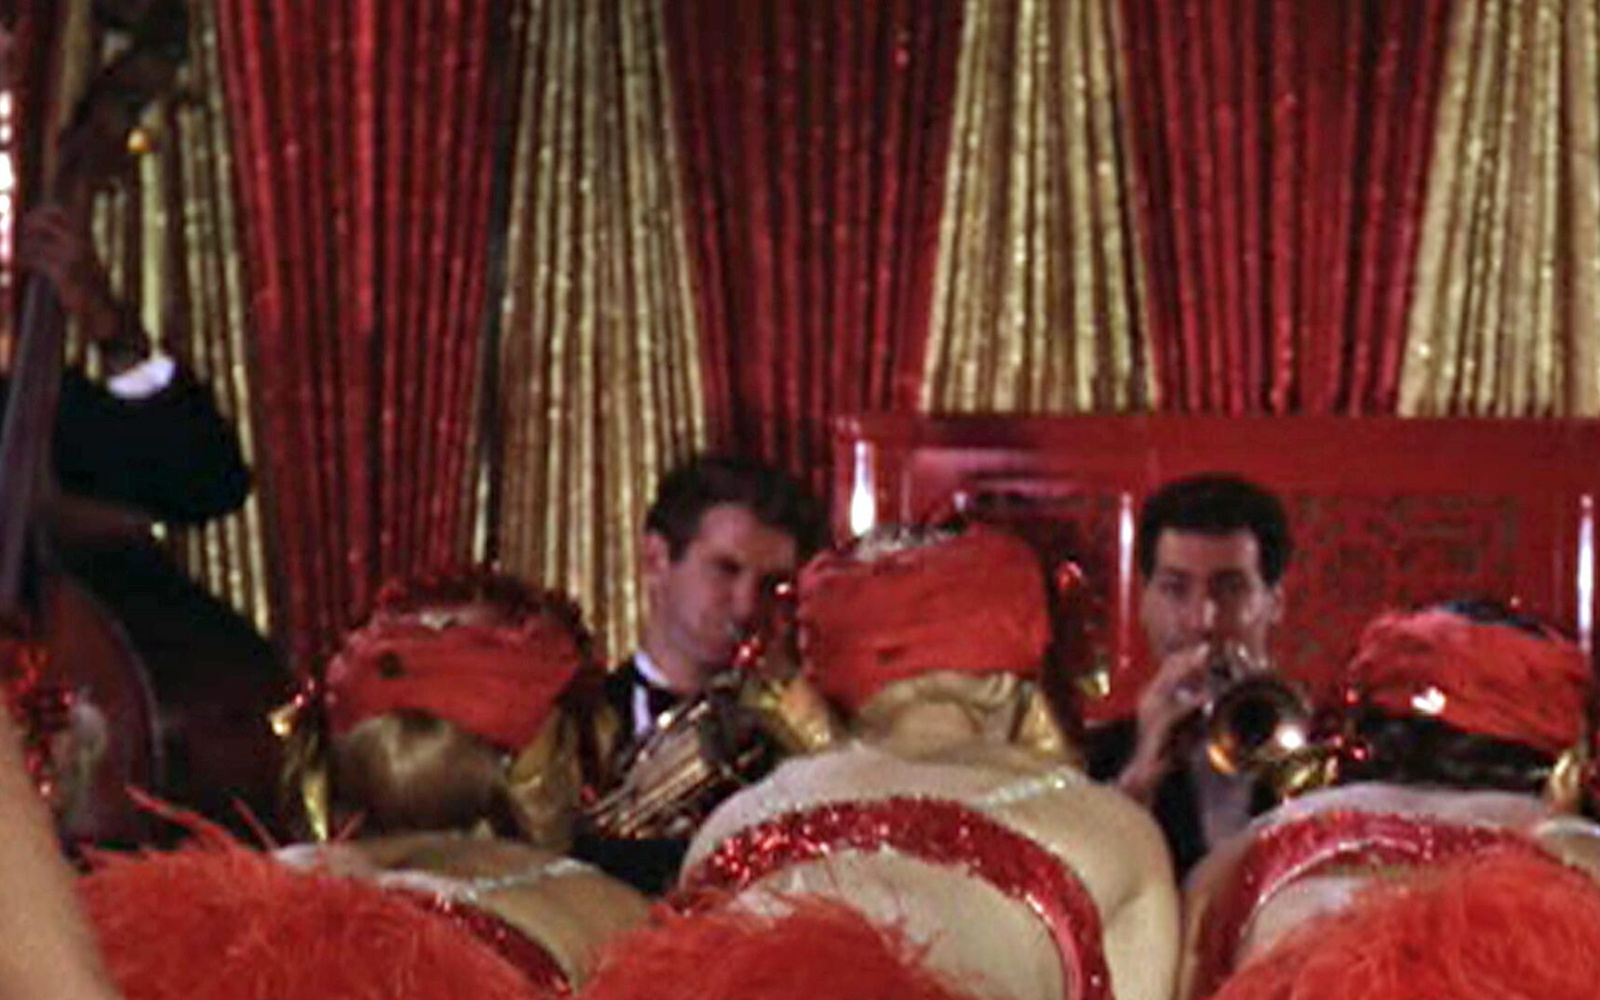 Two trumpet players are seen in front of a golden and red curtain. In the audience sit three women with red headdresses